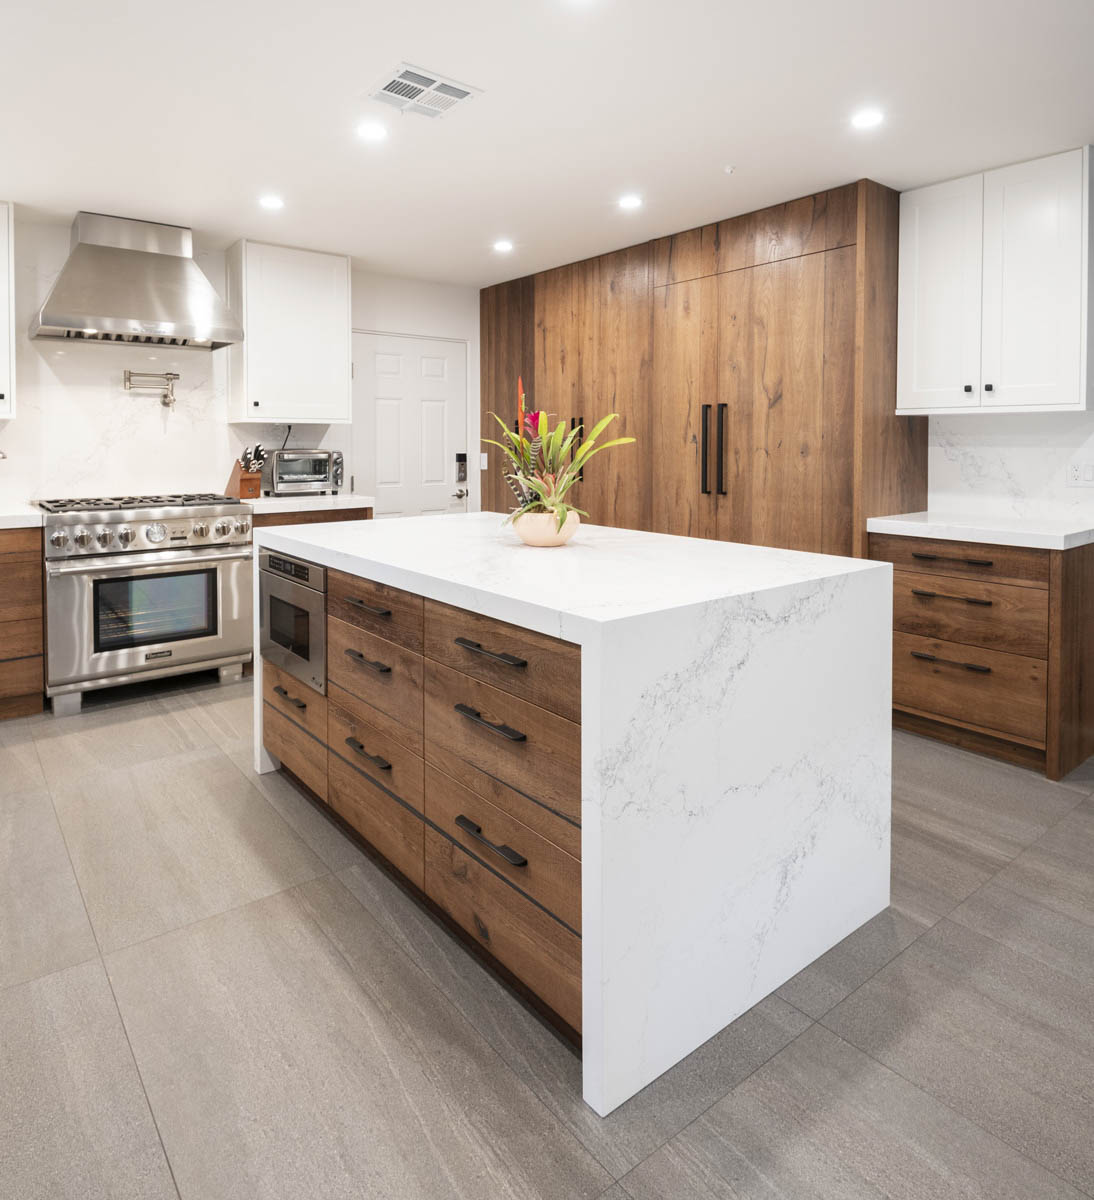 Fitucci Custom Cabinets - Los Angeles - kitchen where everything is built with white marble and custom cabinets. photo is taken closer